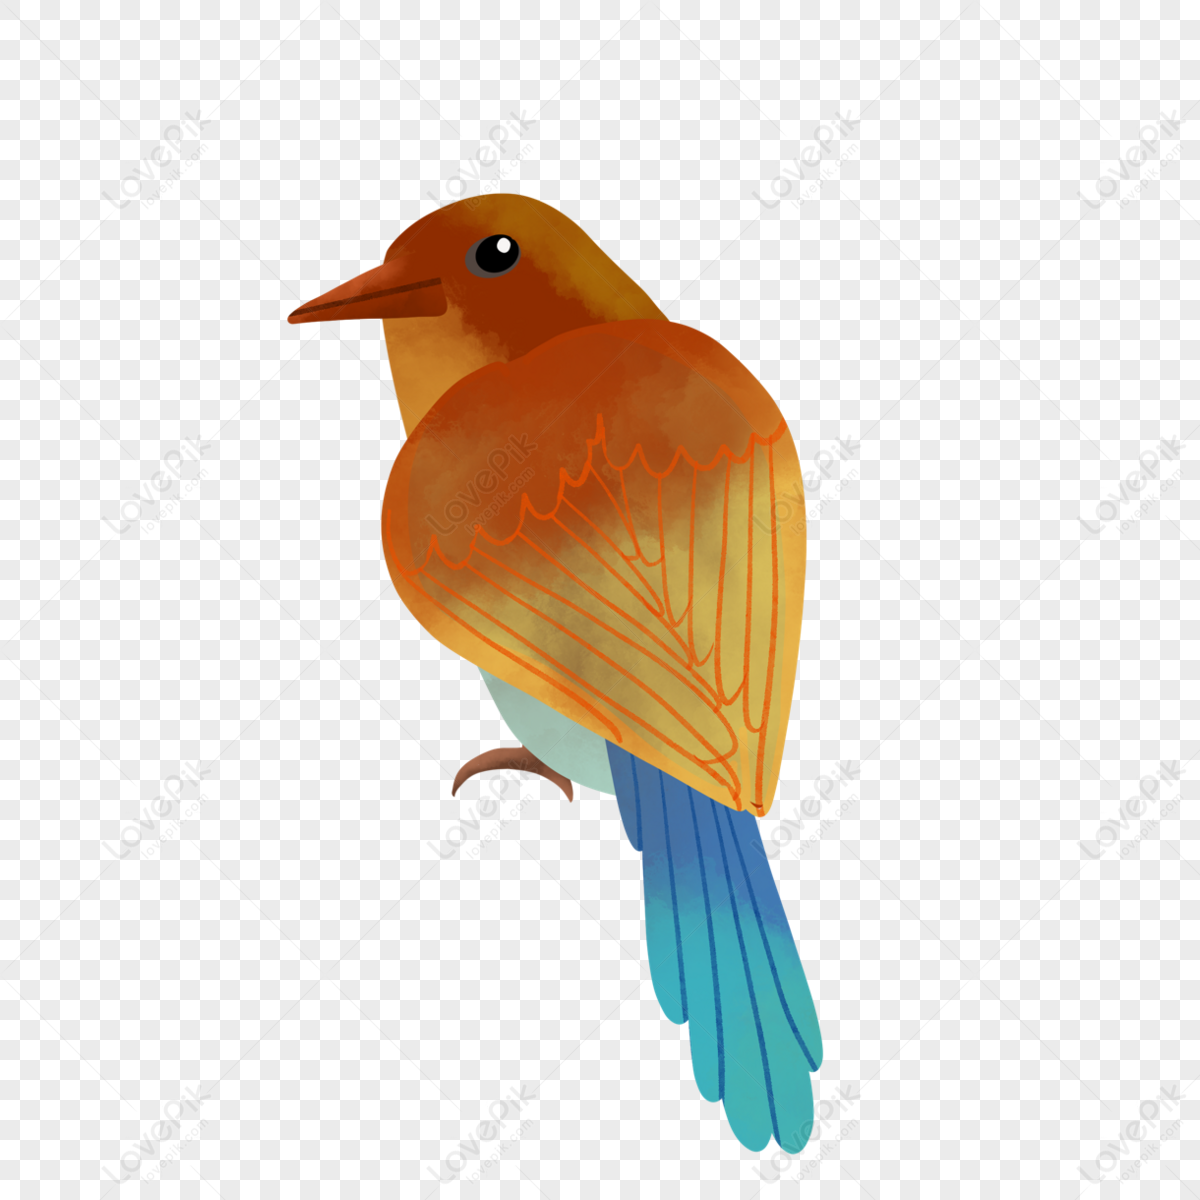 Watercolor blue tail bird animals,birds,natural,feather png picture